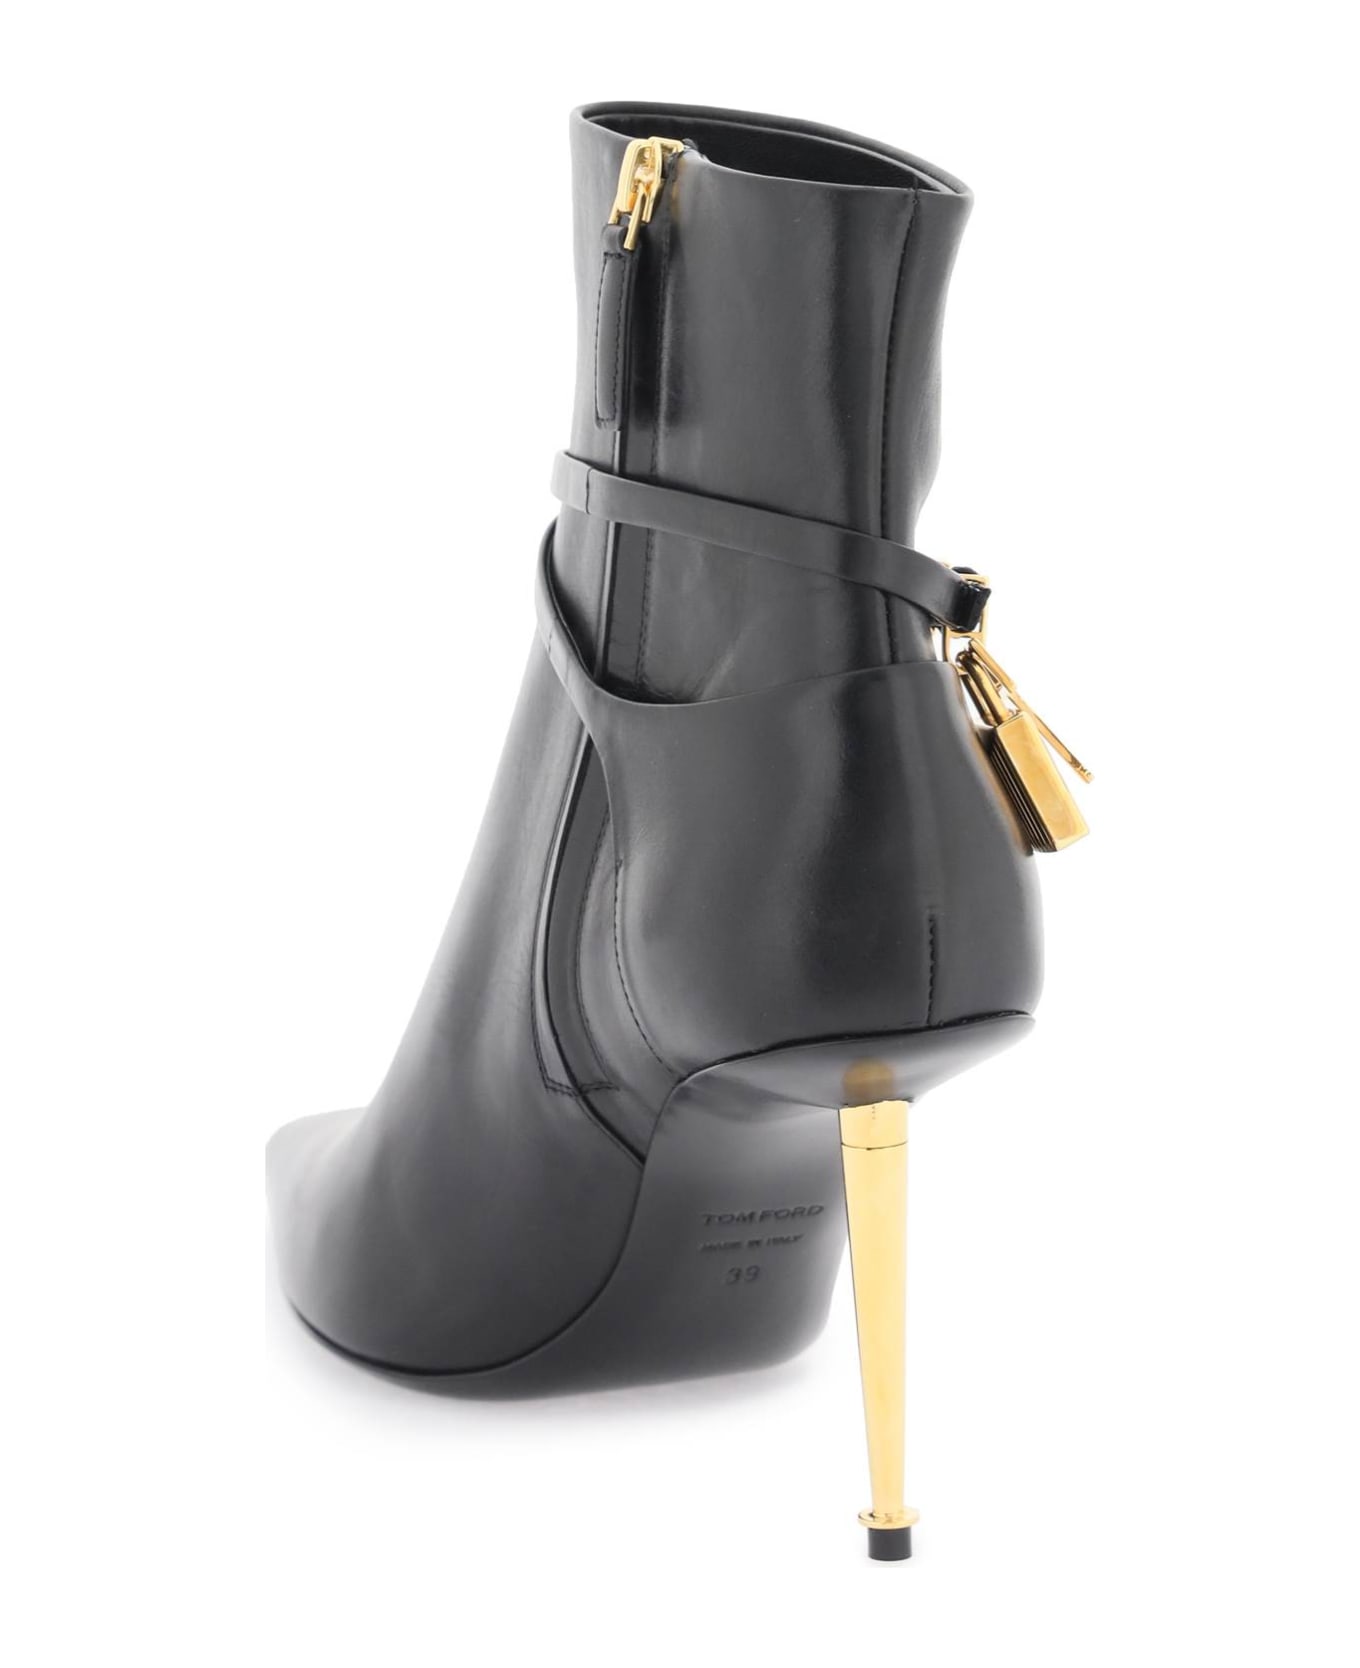 Tom Ford Leather Ankle Boots With Padlock - BLACK ブーツ